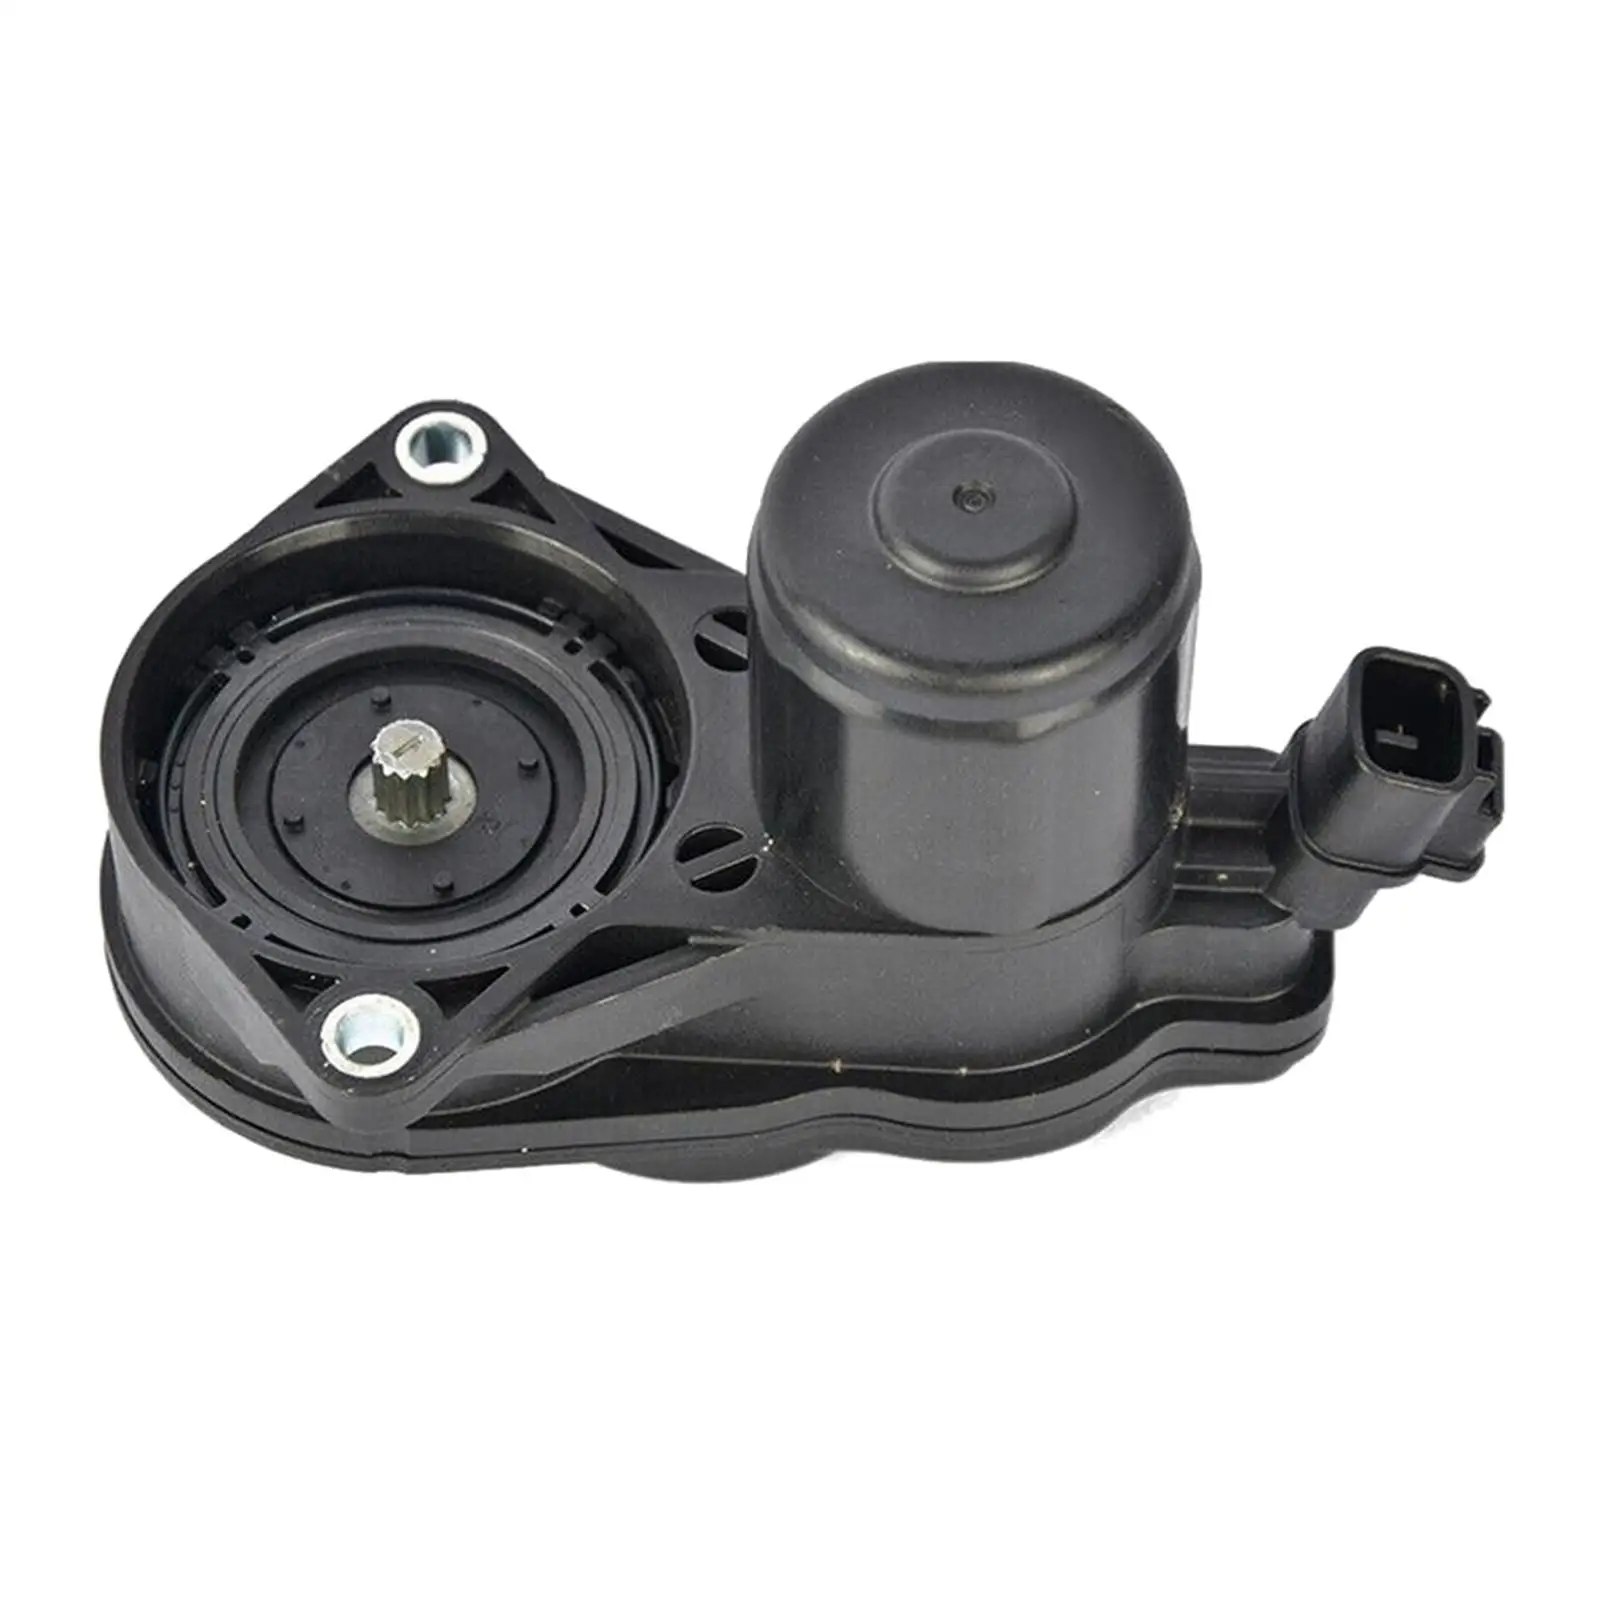 Parking Brake Actuator Assembly Replaces for Toyota Corolla Sedan for c-hr